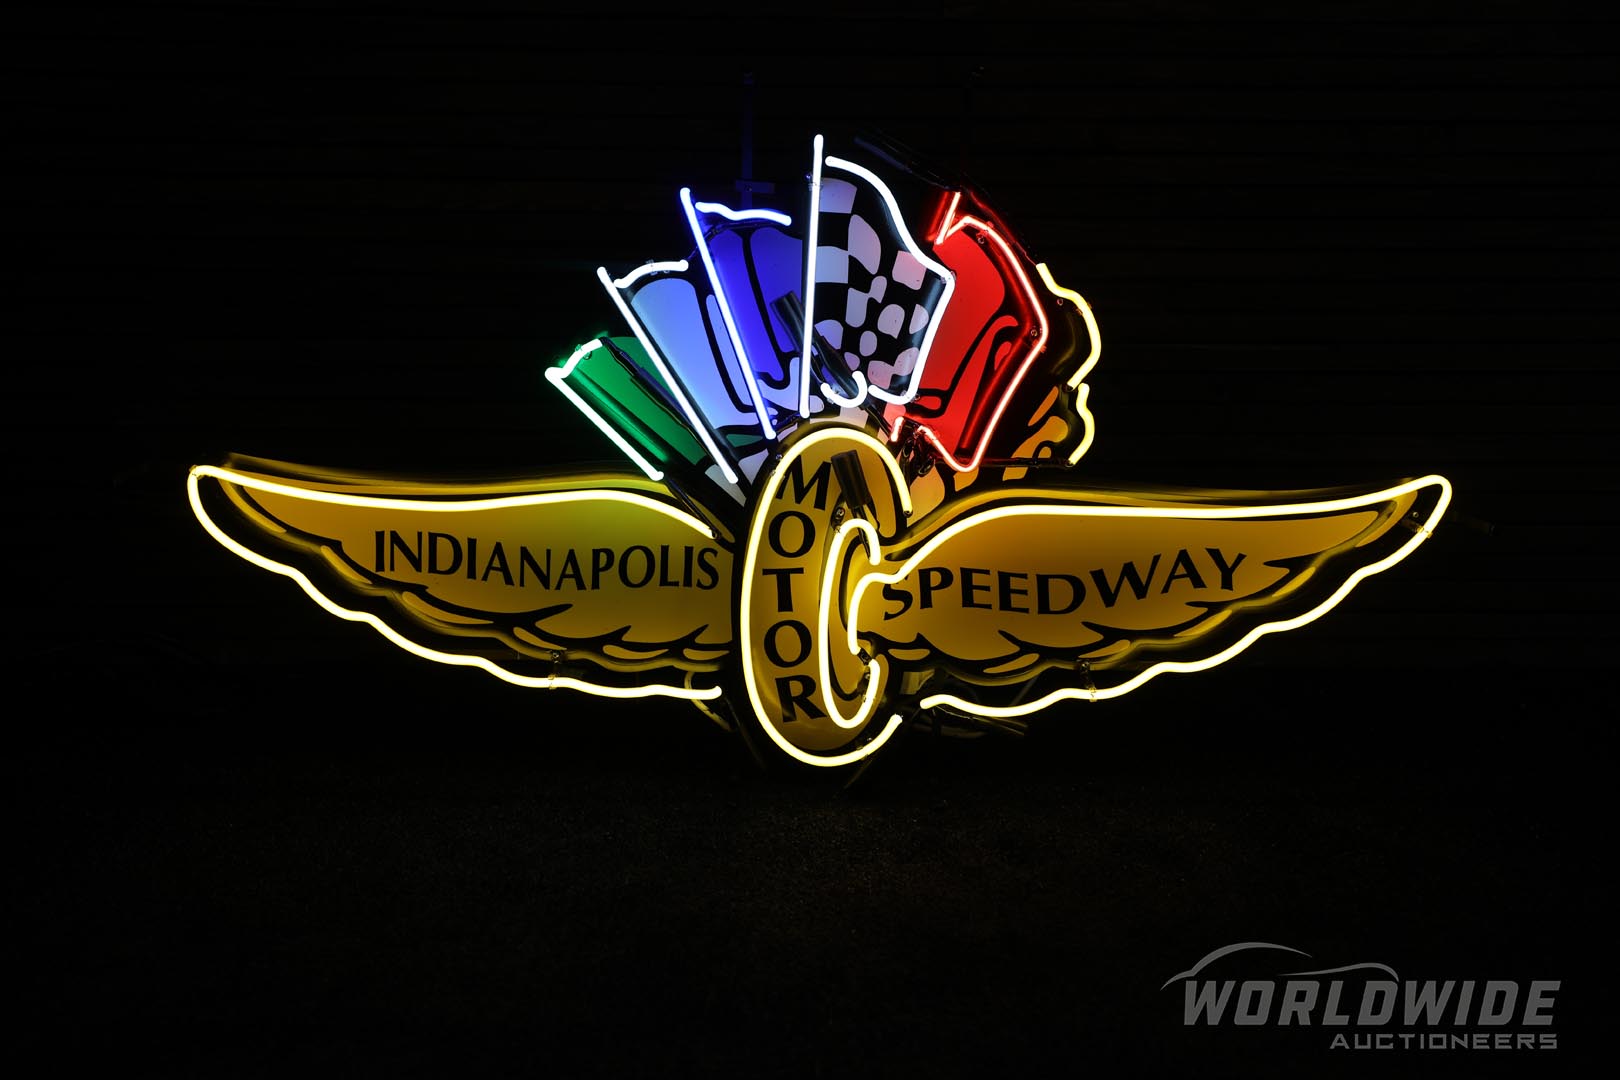  Custom Indianapolis Motor Spee dway Winged Wheel Neon Sign 